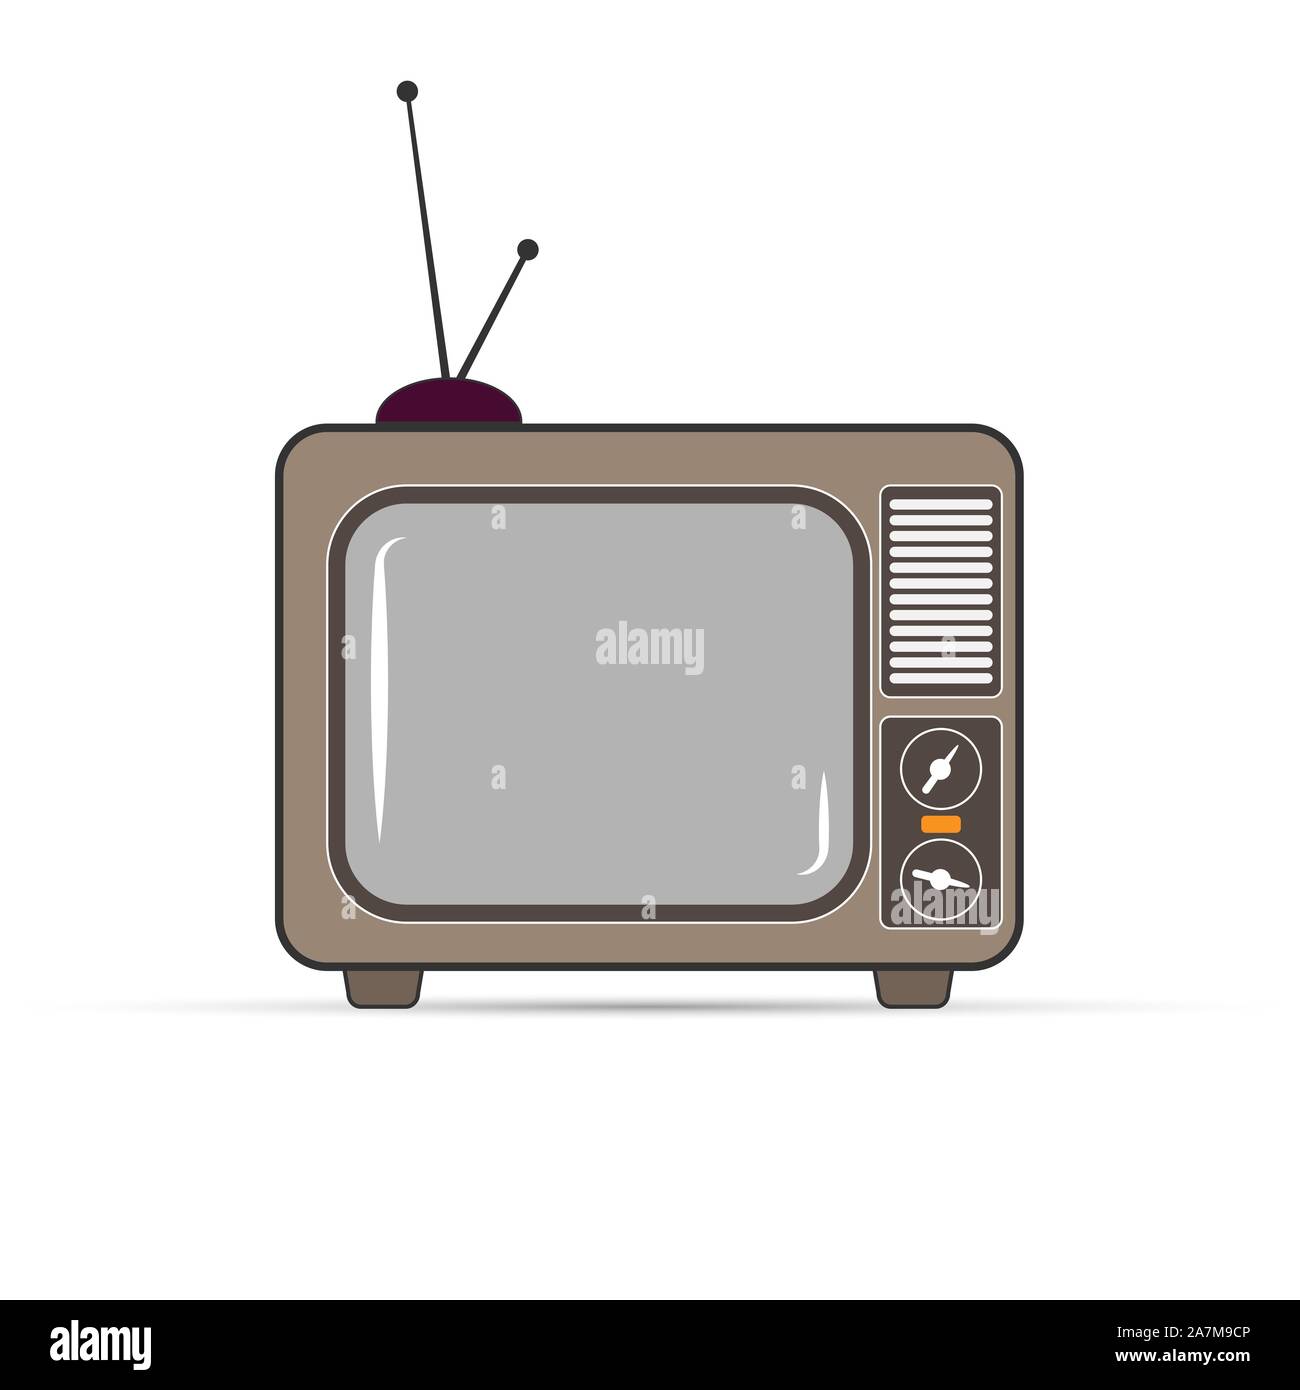 simple icon of a CRT TV. Flat design. Stock Vector